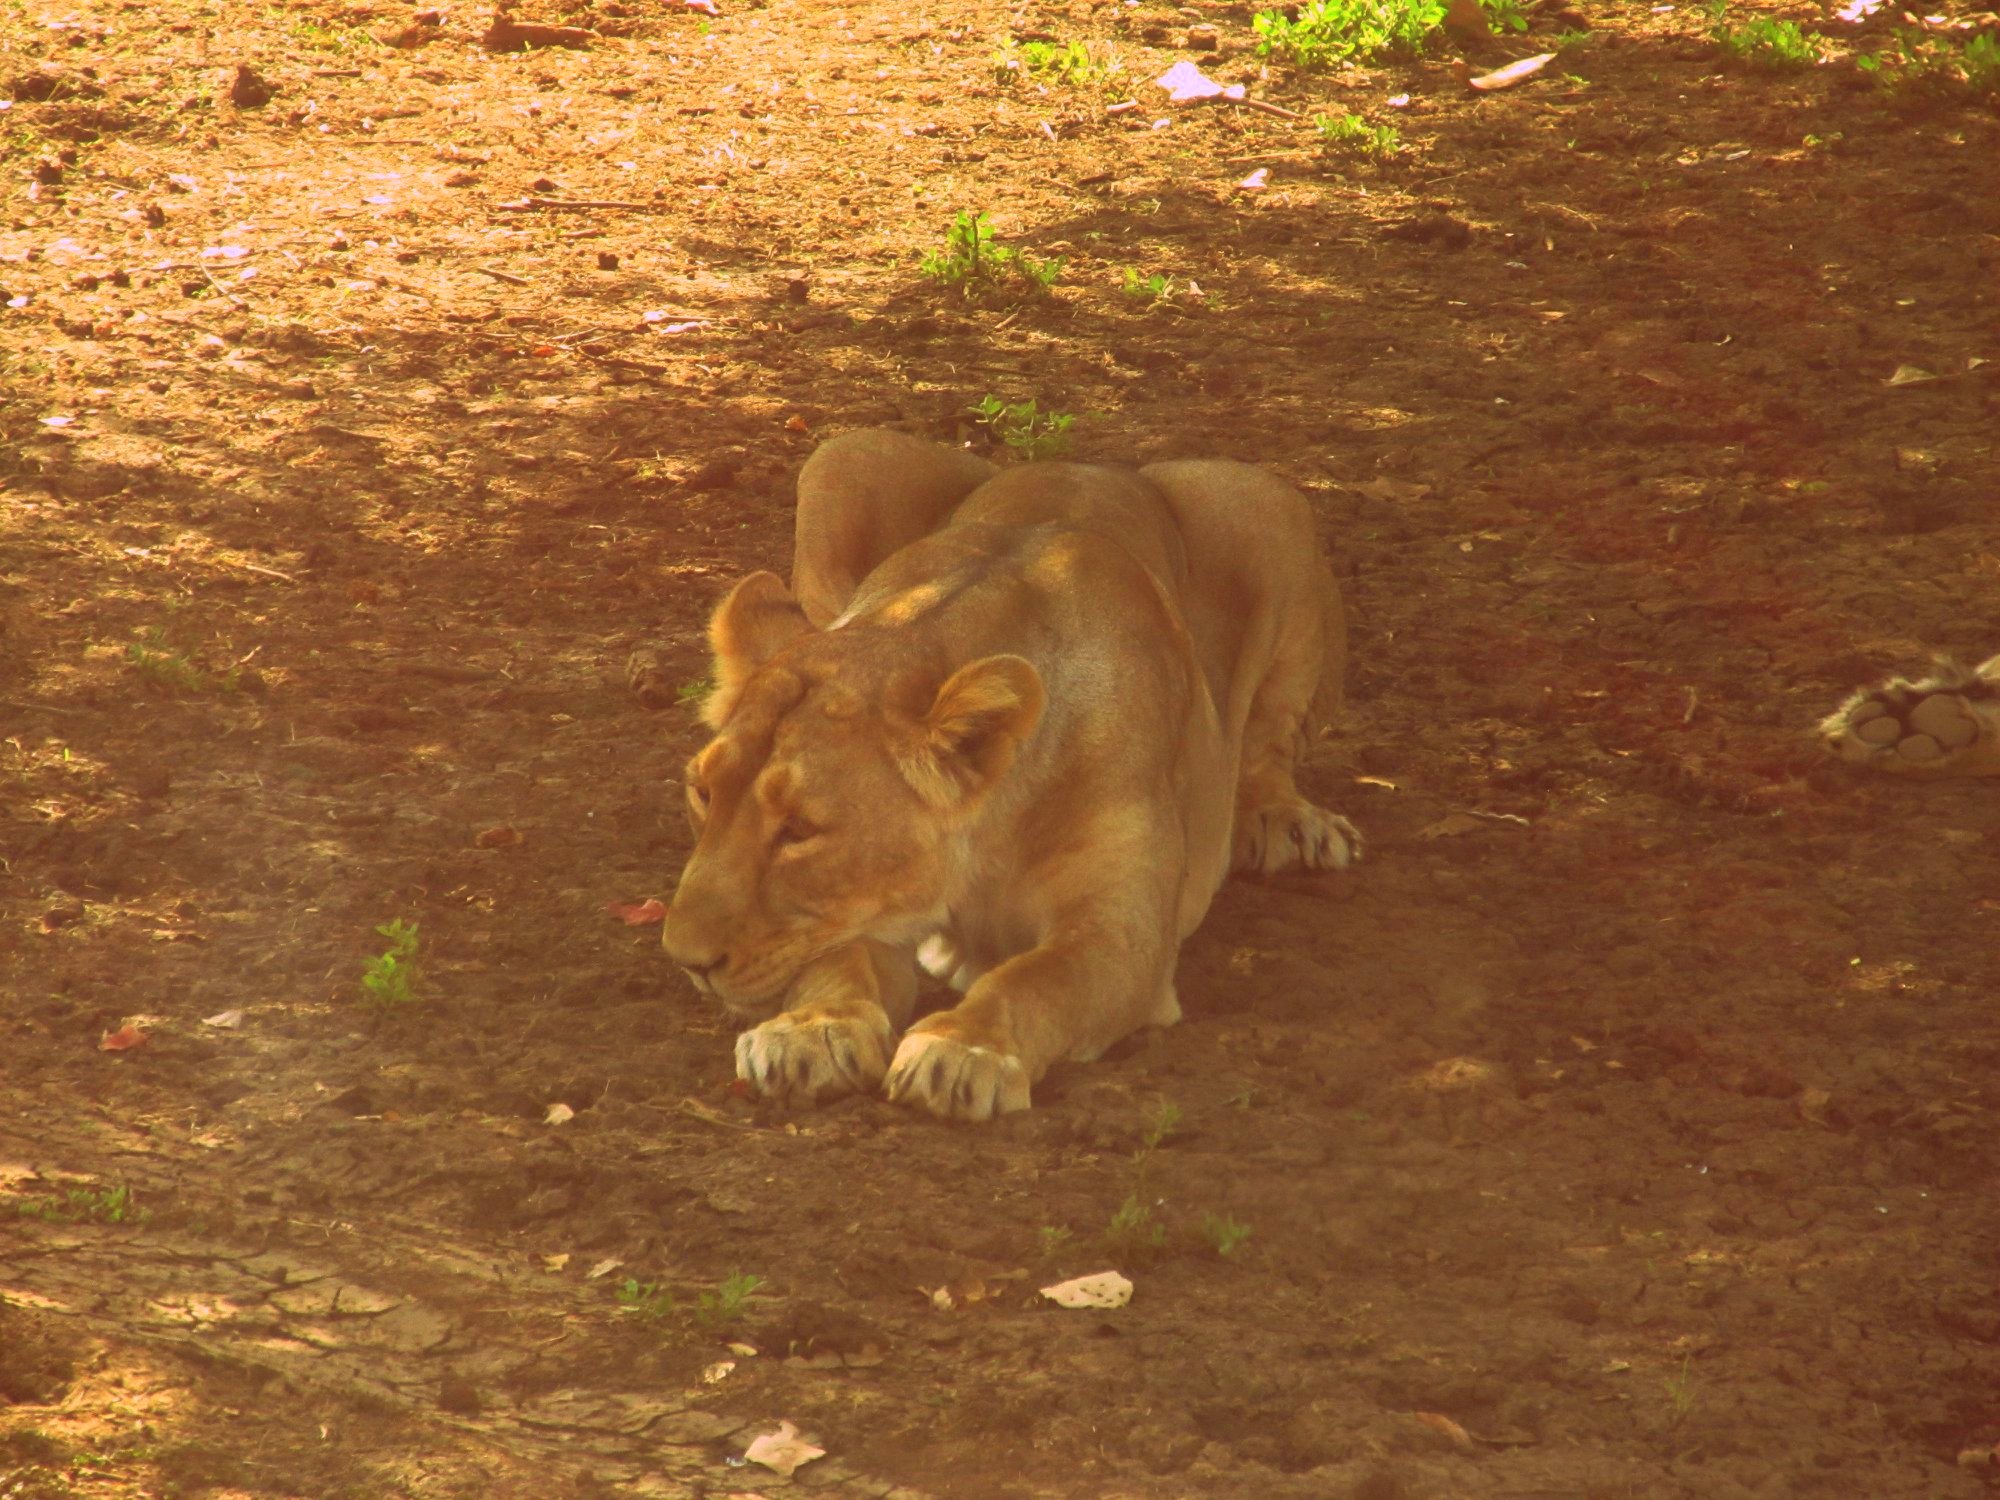 Visiting Gir forest with kids to watch the Asiatic lions